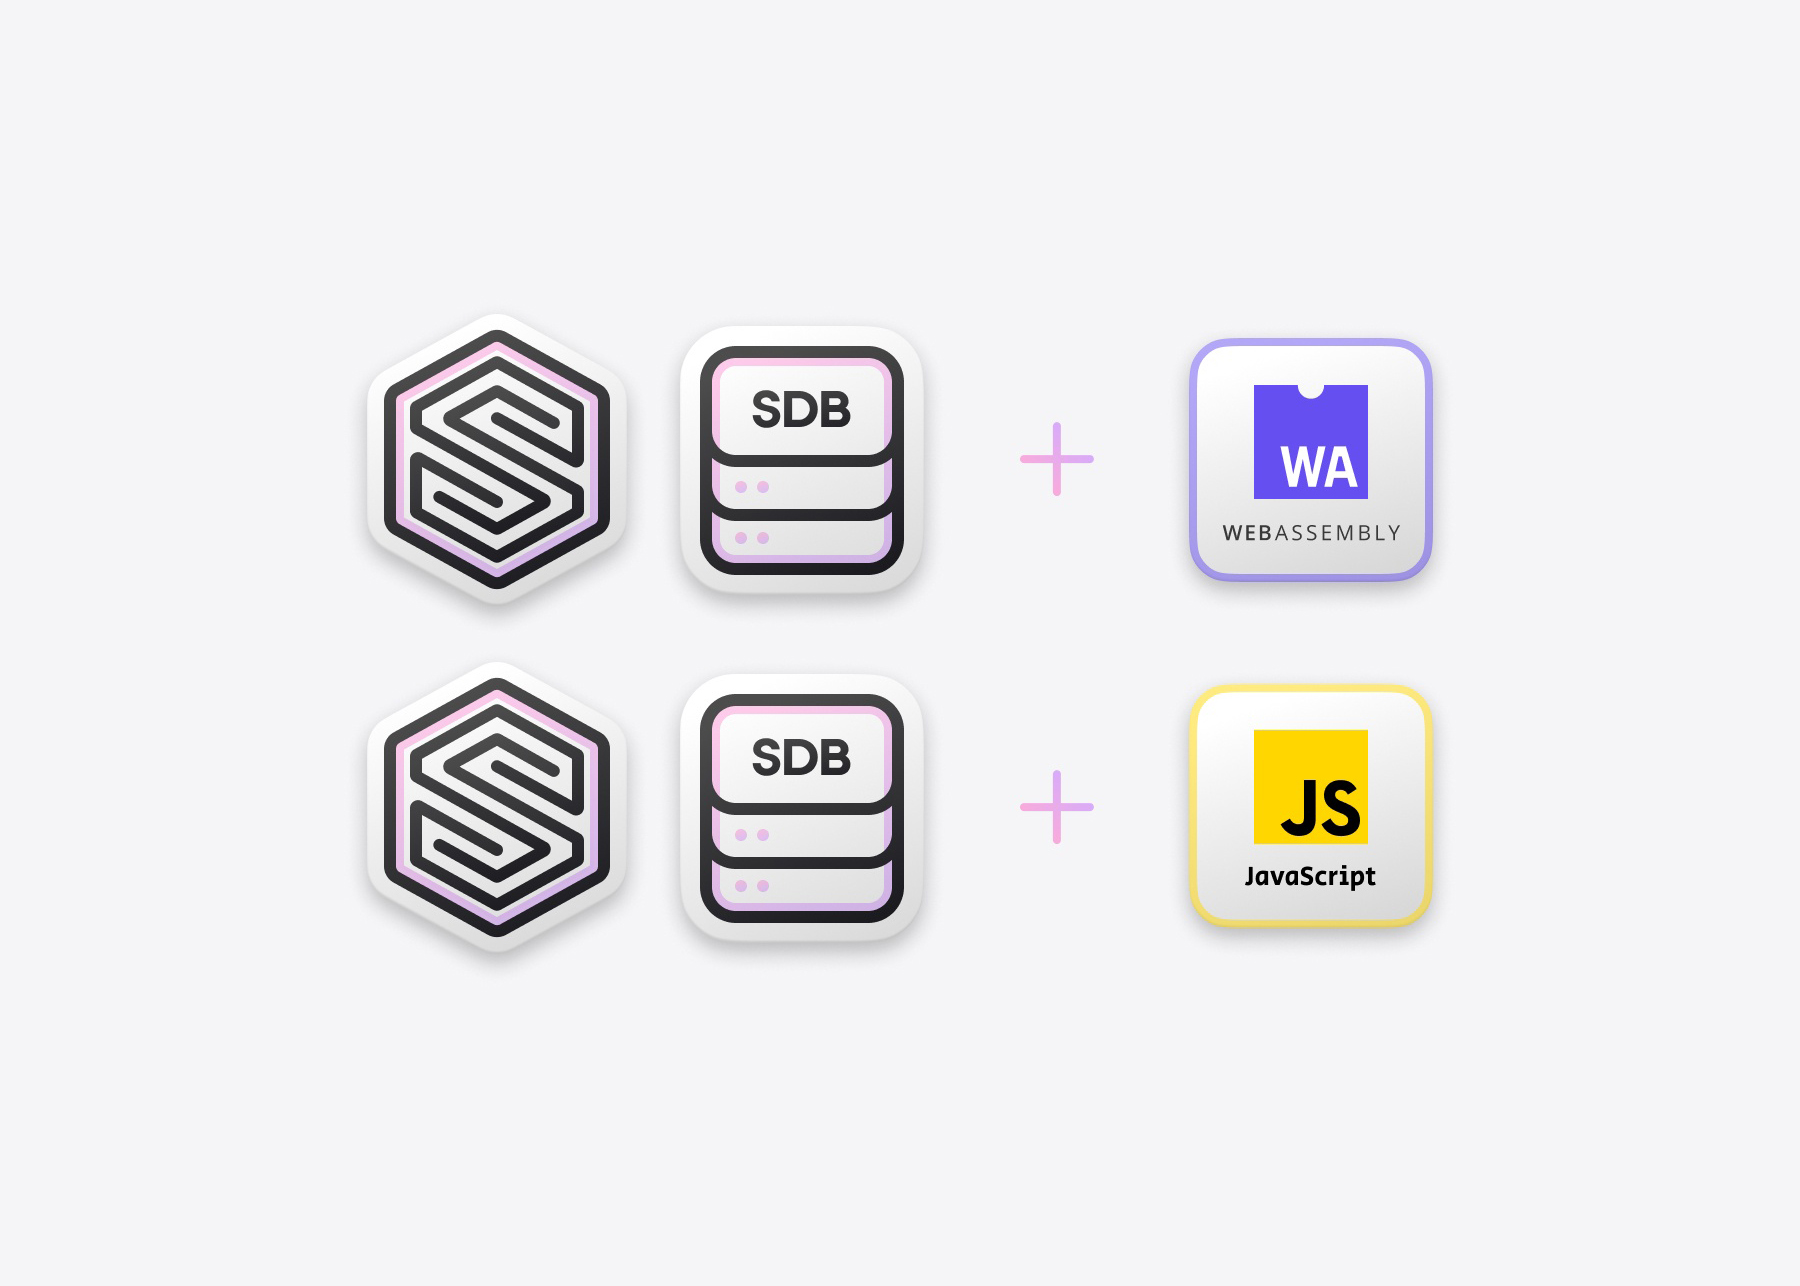 Extend your database with JavaScript and WebAssembly functions